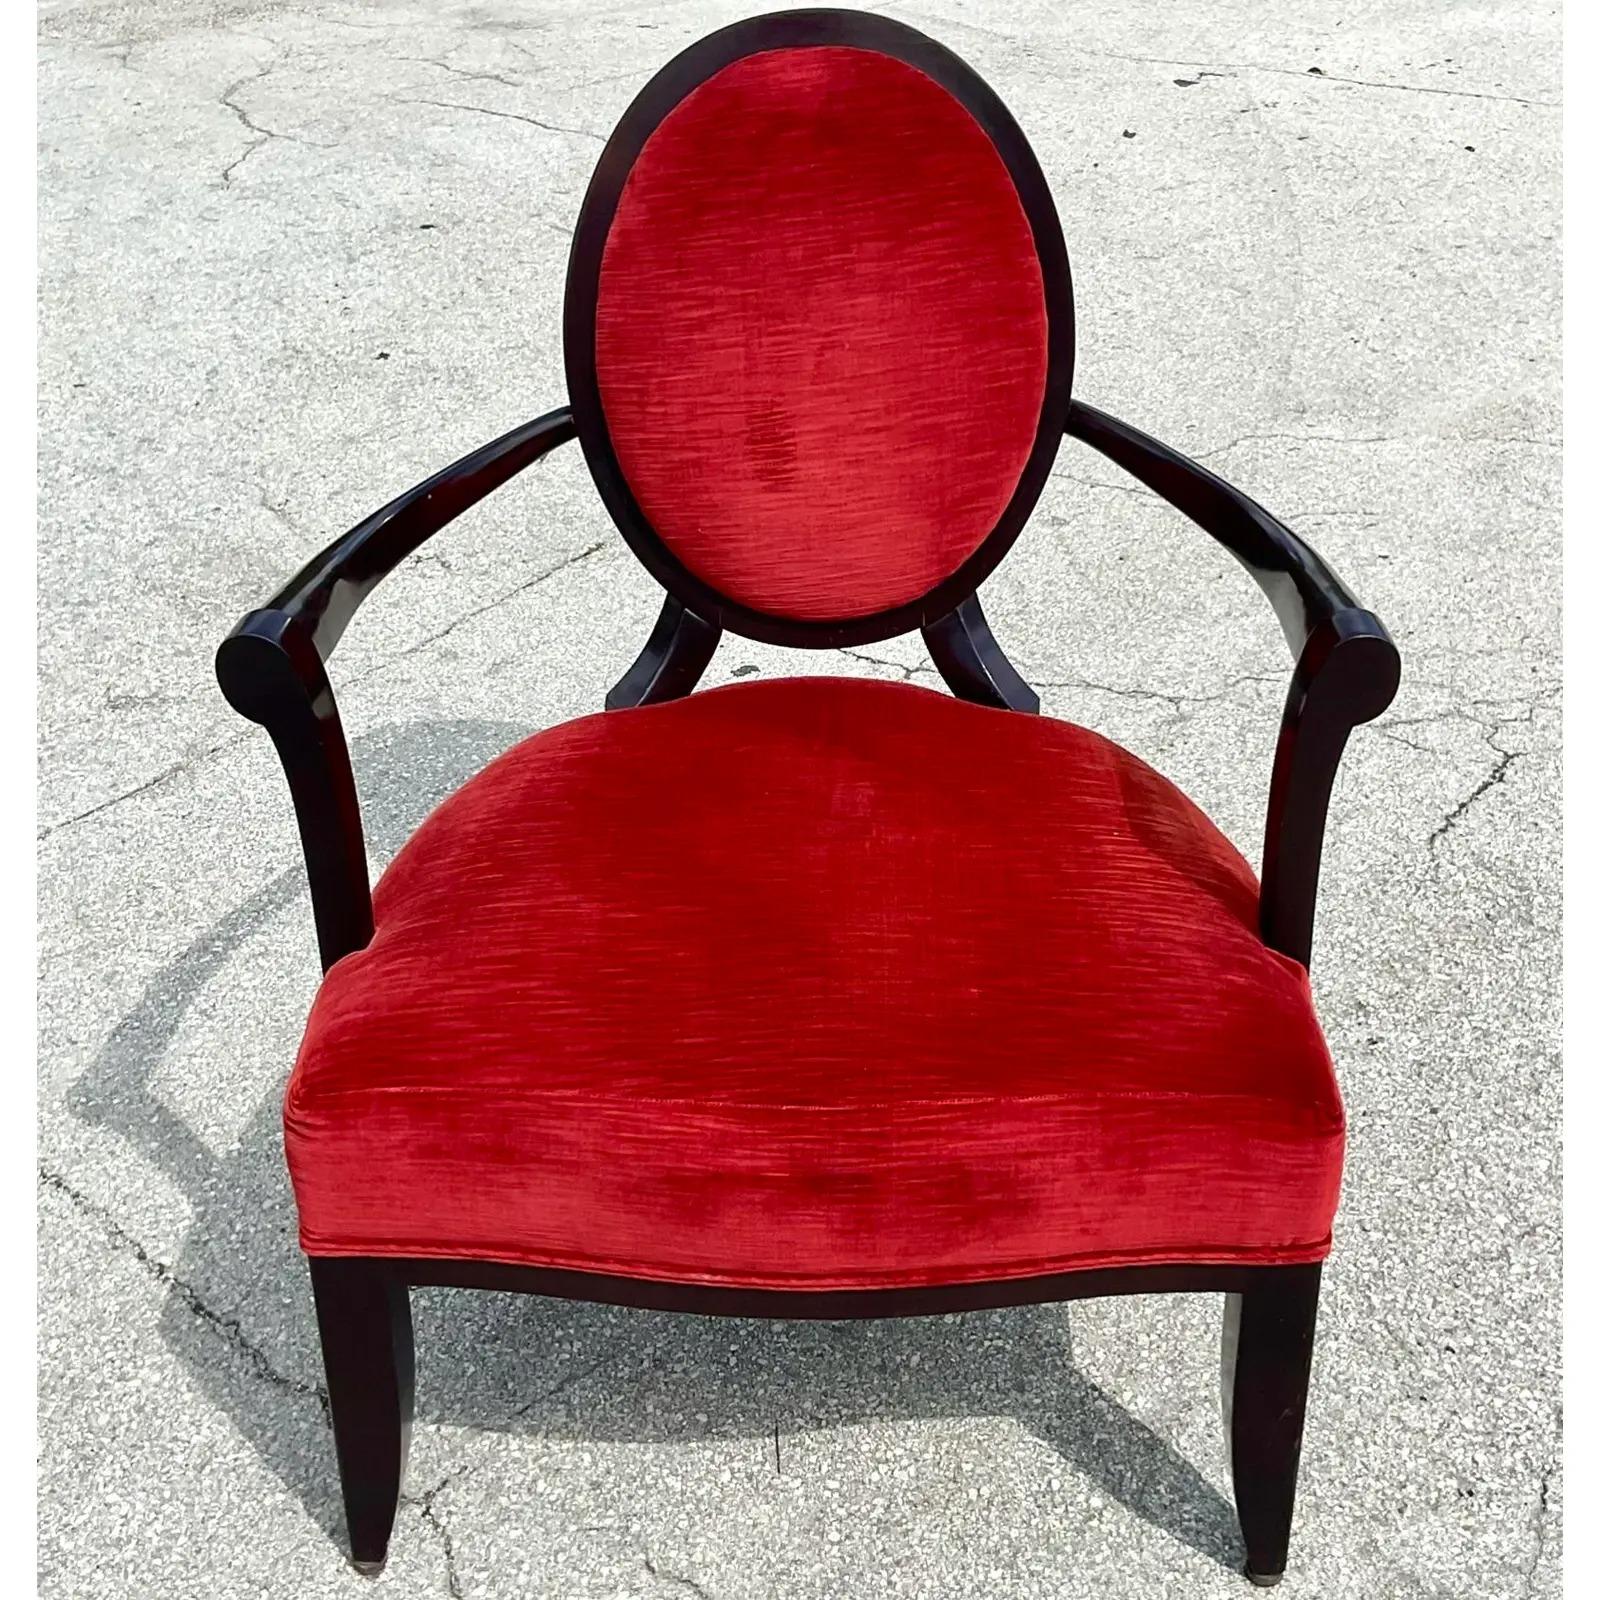 Fantastic vintage Contemporary Arm chair. Made by the designer Barbara Barry for the iconic Baker Furniture group. Beautiful medallion back design with a wide seat and gorgeous velvet upholstery. Mark on the bottom. Acquired from a Naples estate.